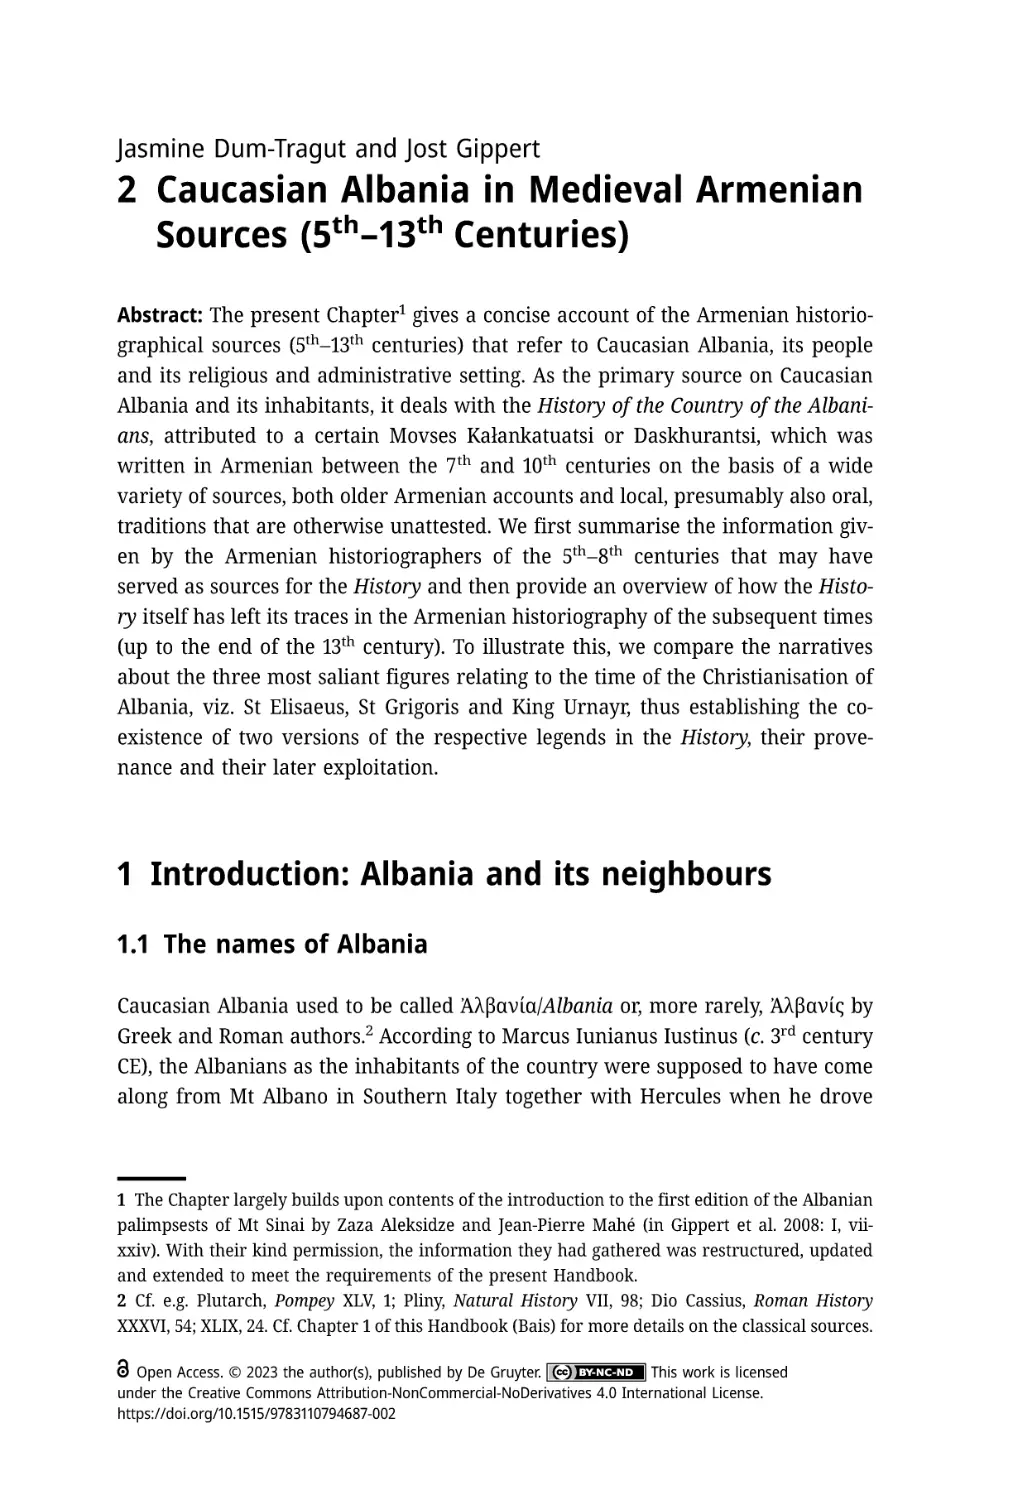 2 Caucasian Albania in Medieval Armenian Sources (5<sup>th</sup>–13<sup>th</sup> Centuries)